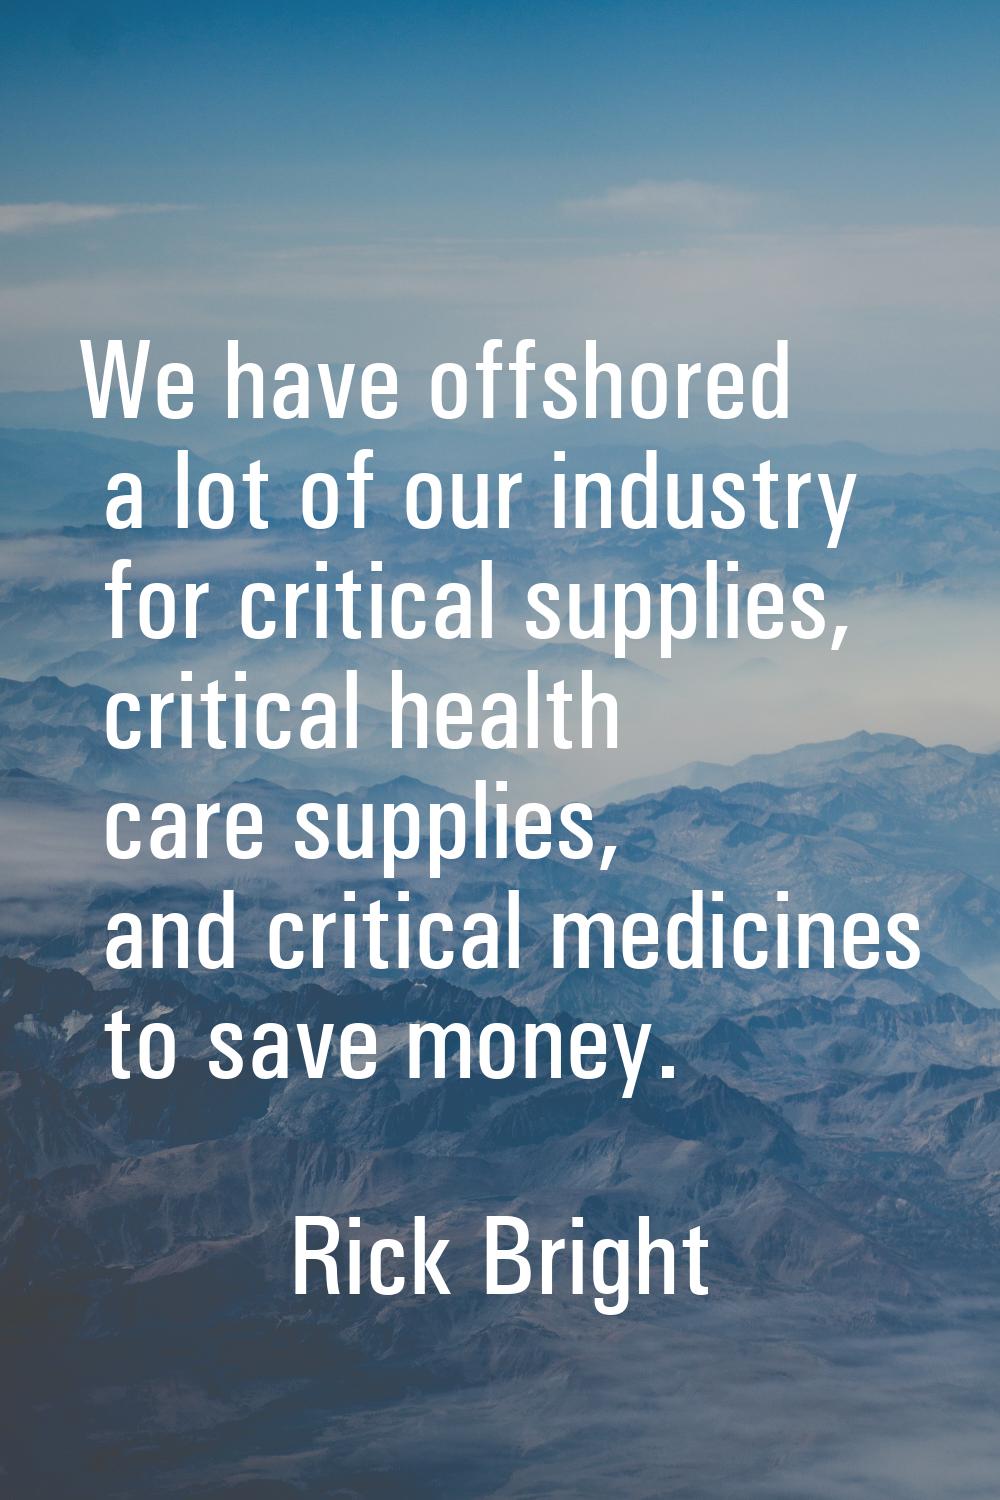 We have offshored a lot of our industry for critical supplies, critical health care supplies, and c